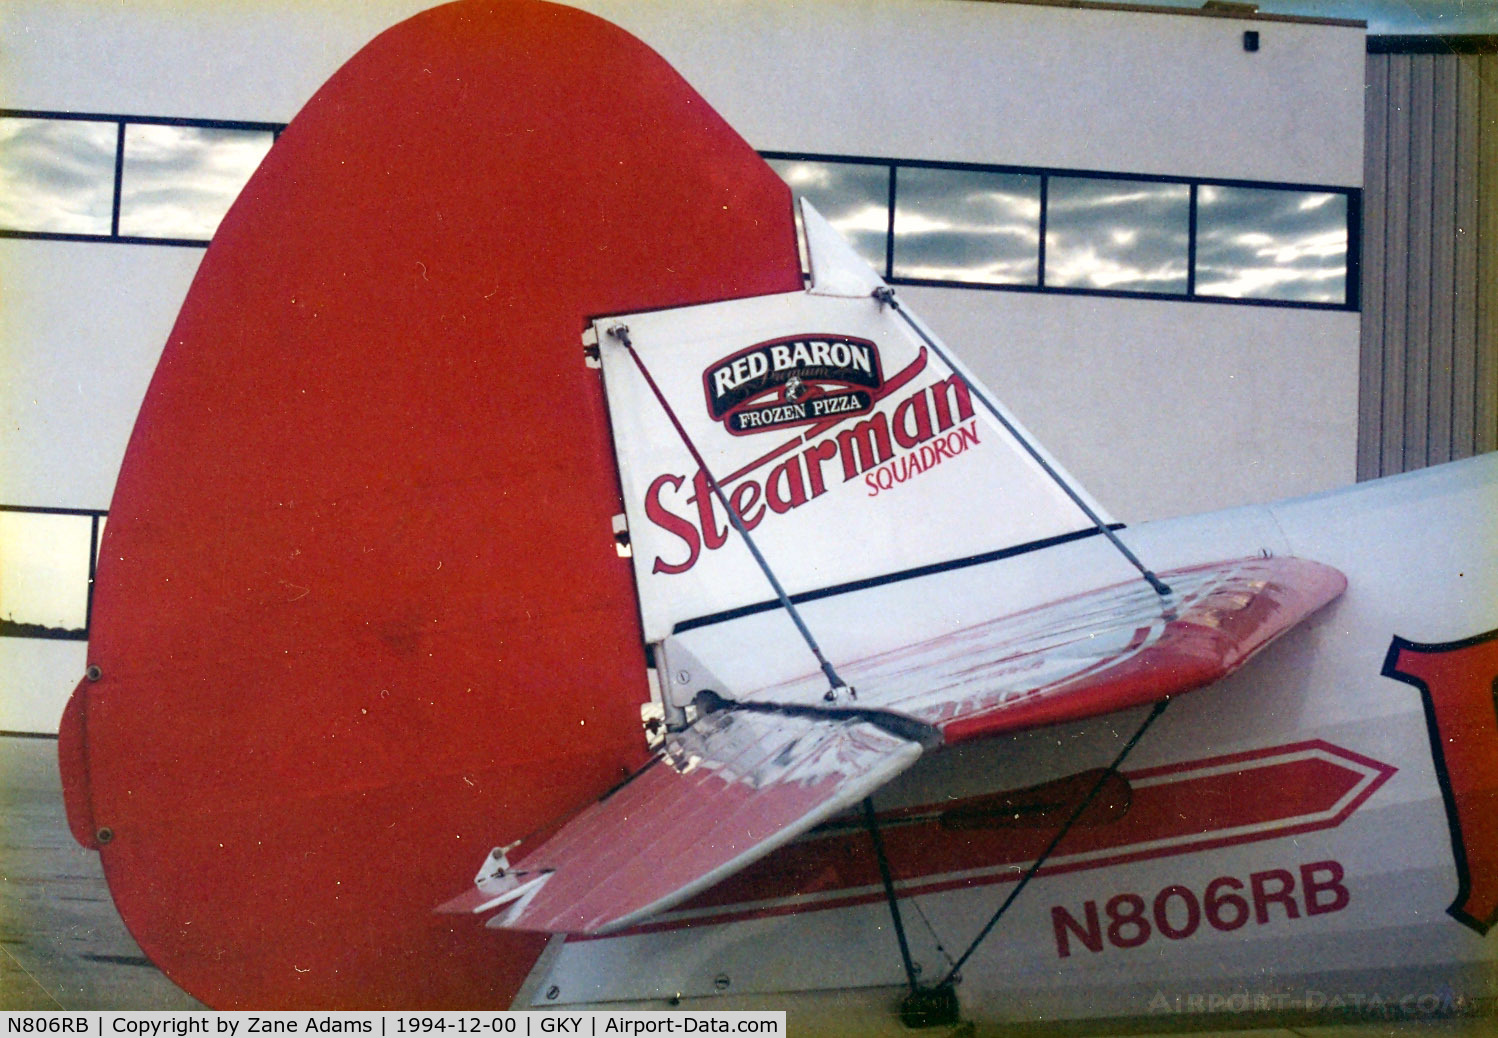 N806RB, 1942 Boeing A75 C/N 75-4000, Red Baron Stearman - this is of of two Red Baron aircraft that were destroyed in an airshow midair collision at Kissimmee, FL 04/19/98